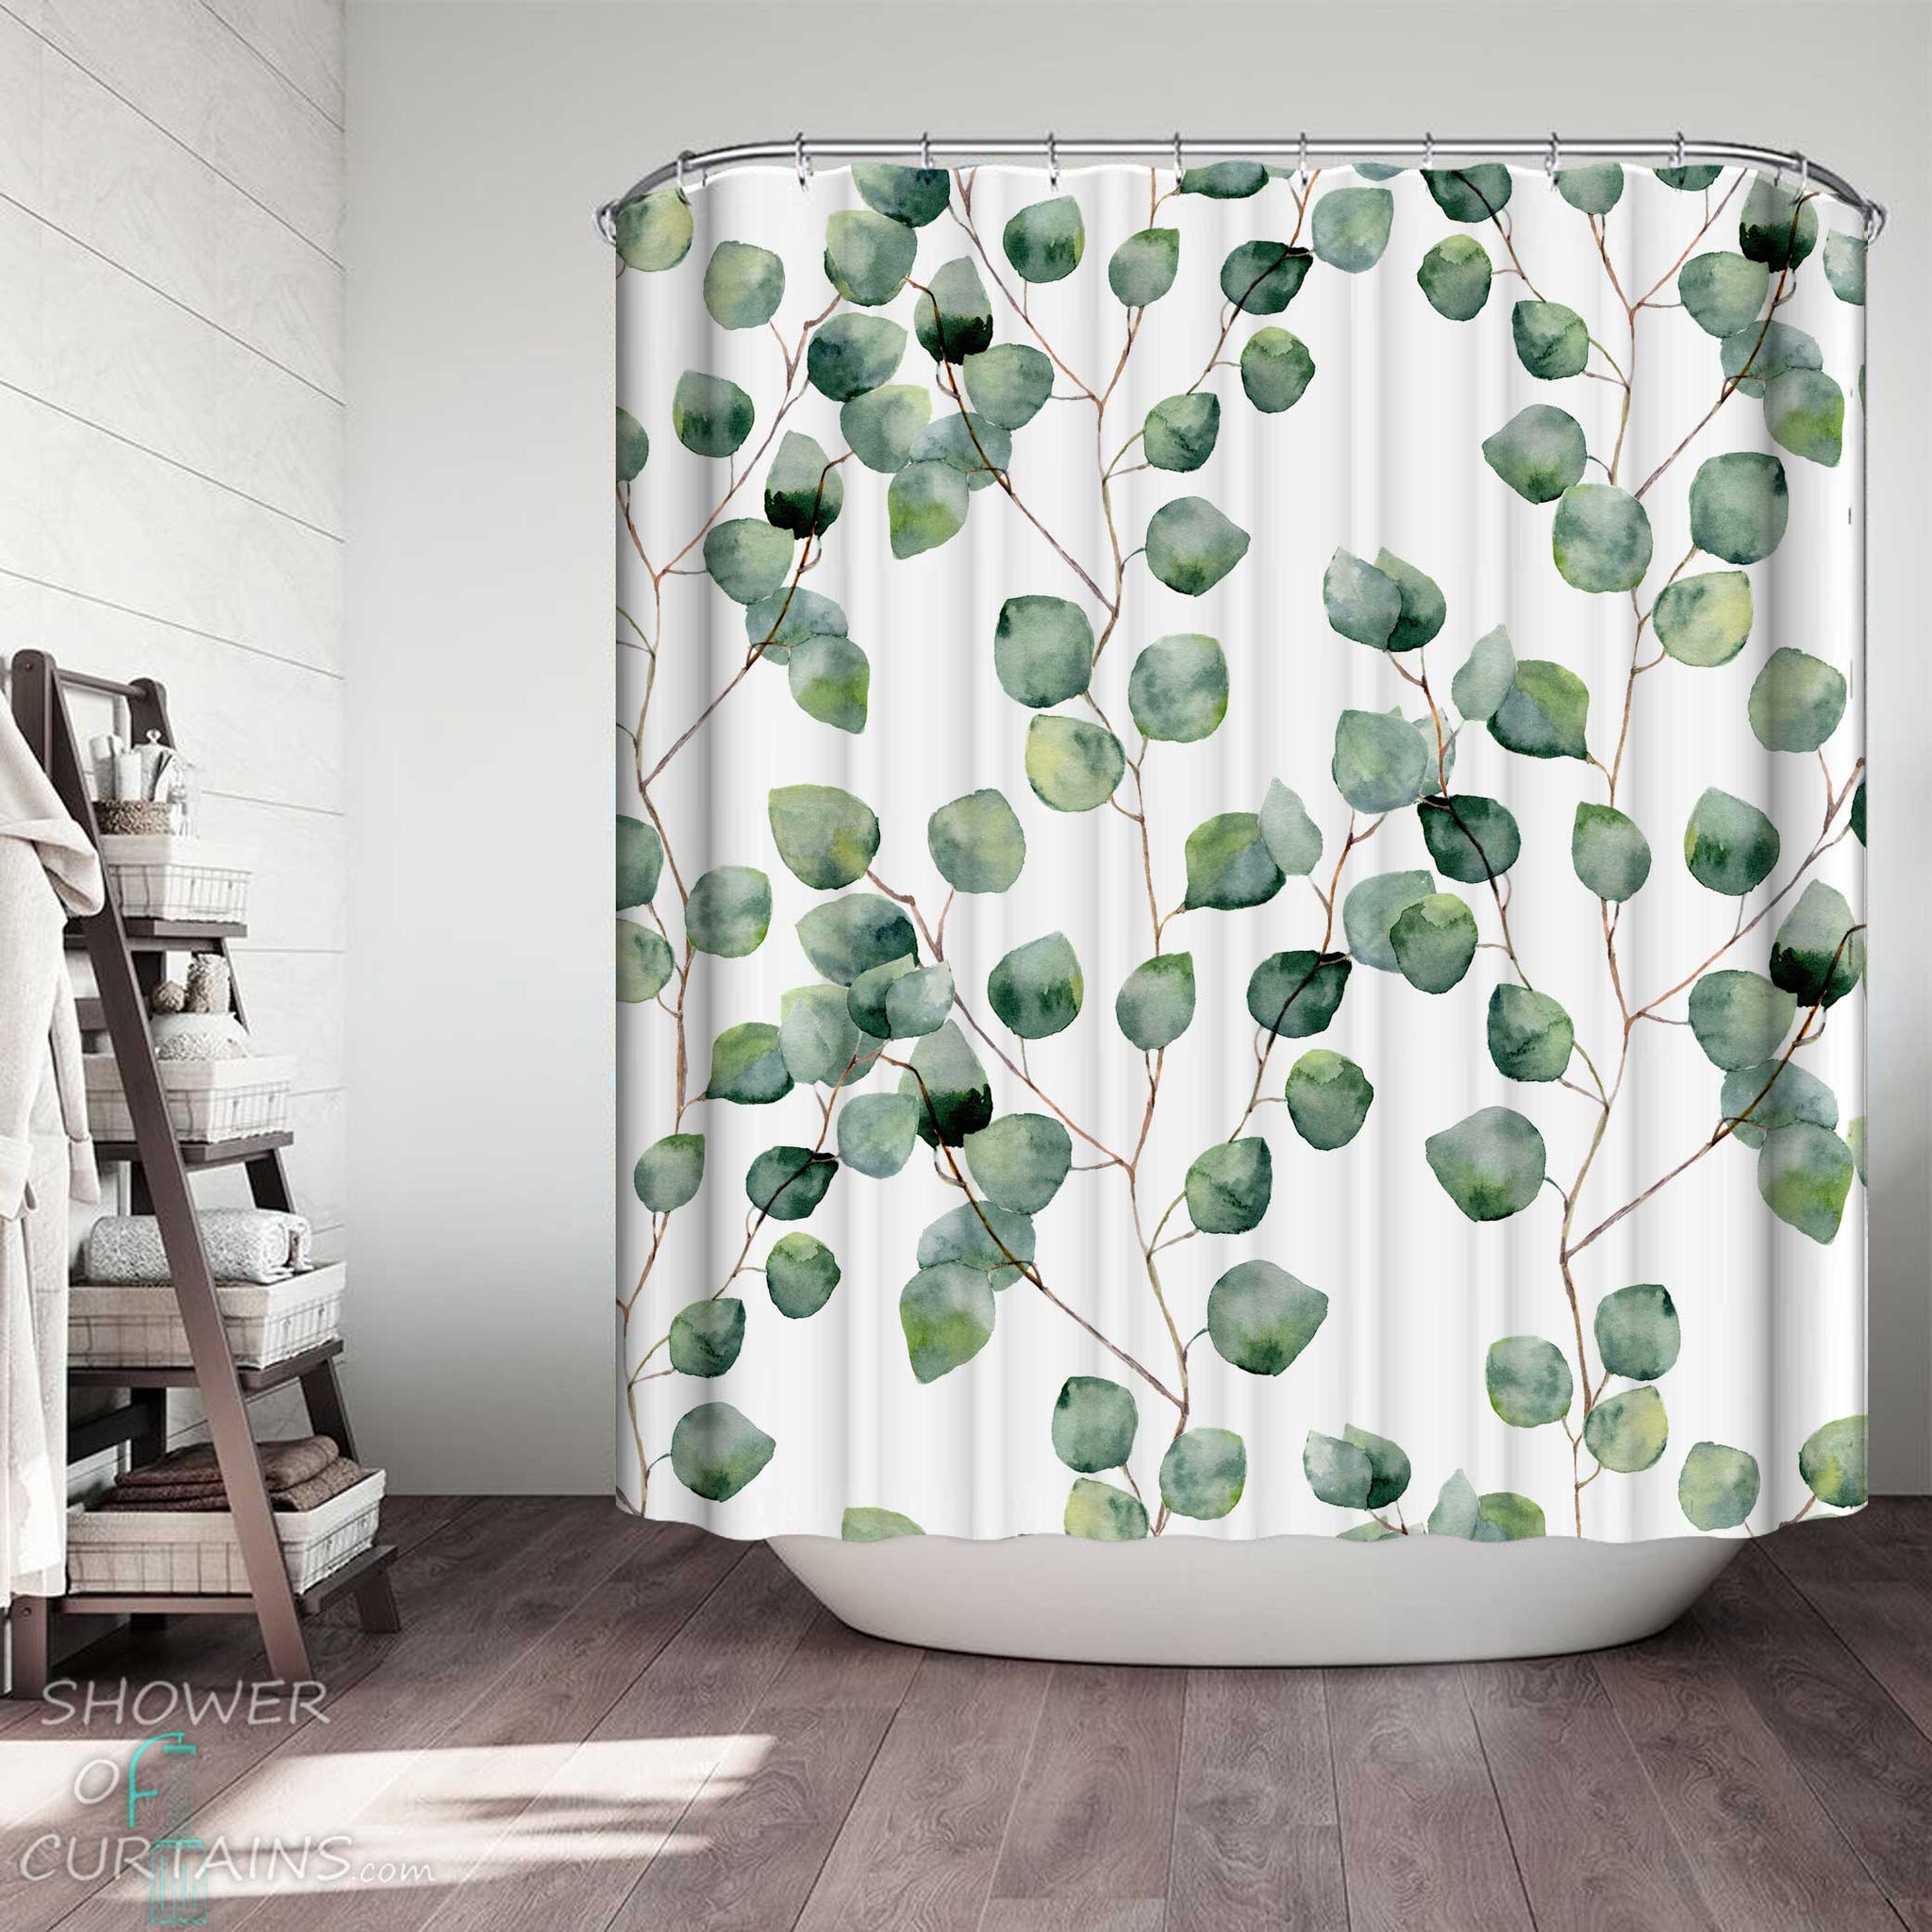 Shower Curtains with Modest Leafy Branches – Shower of Curtains